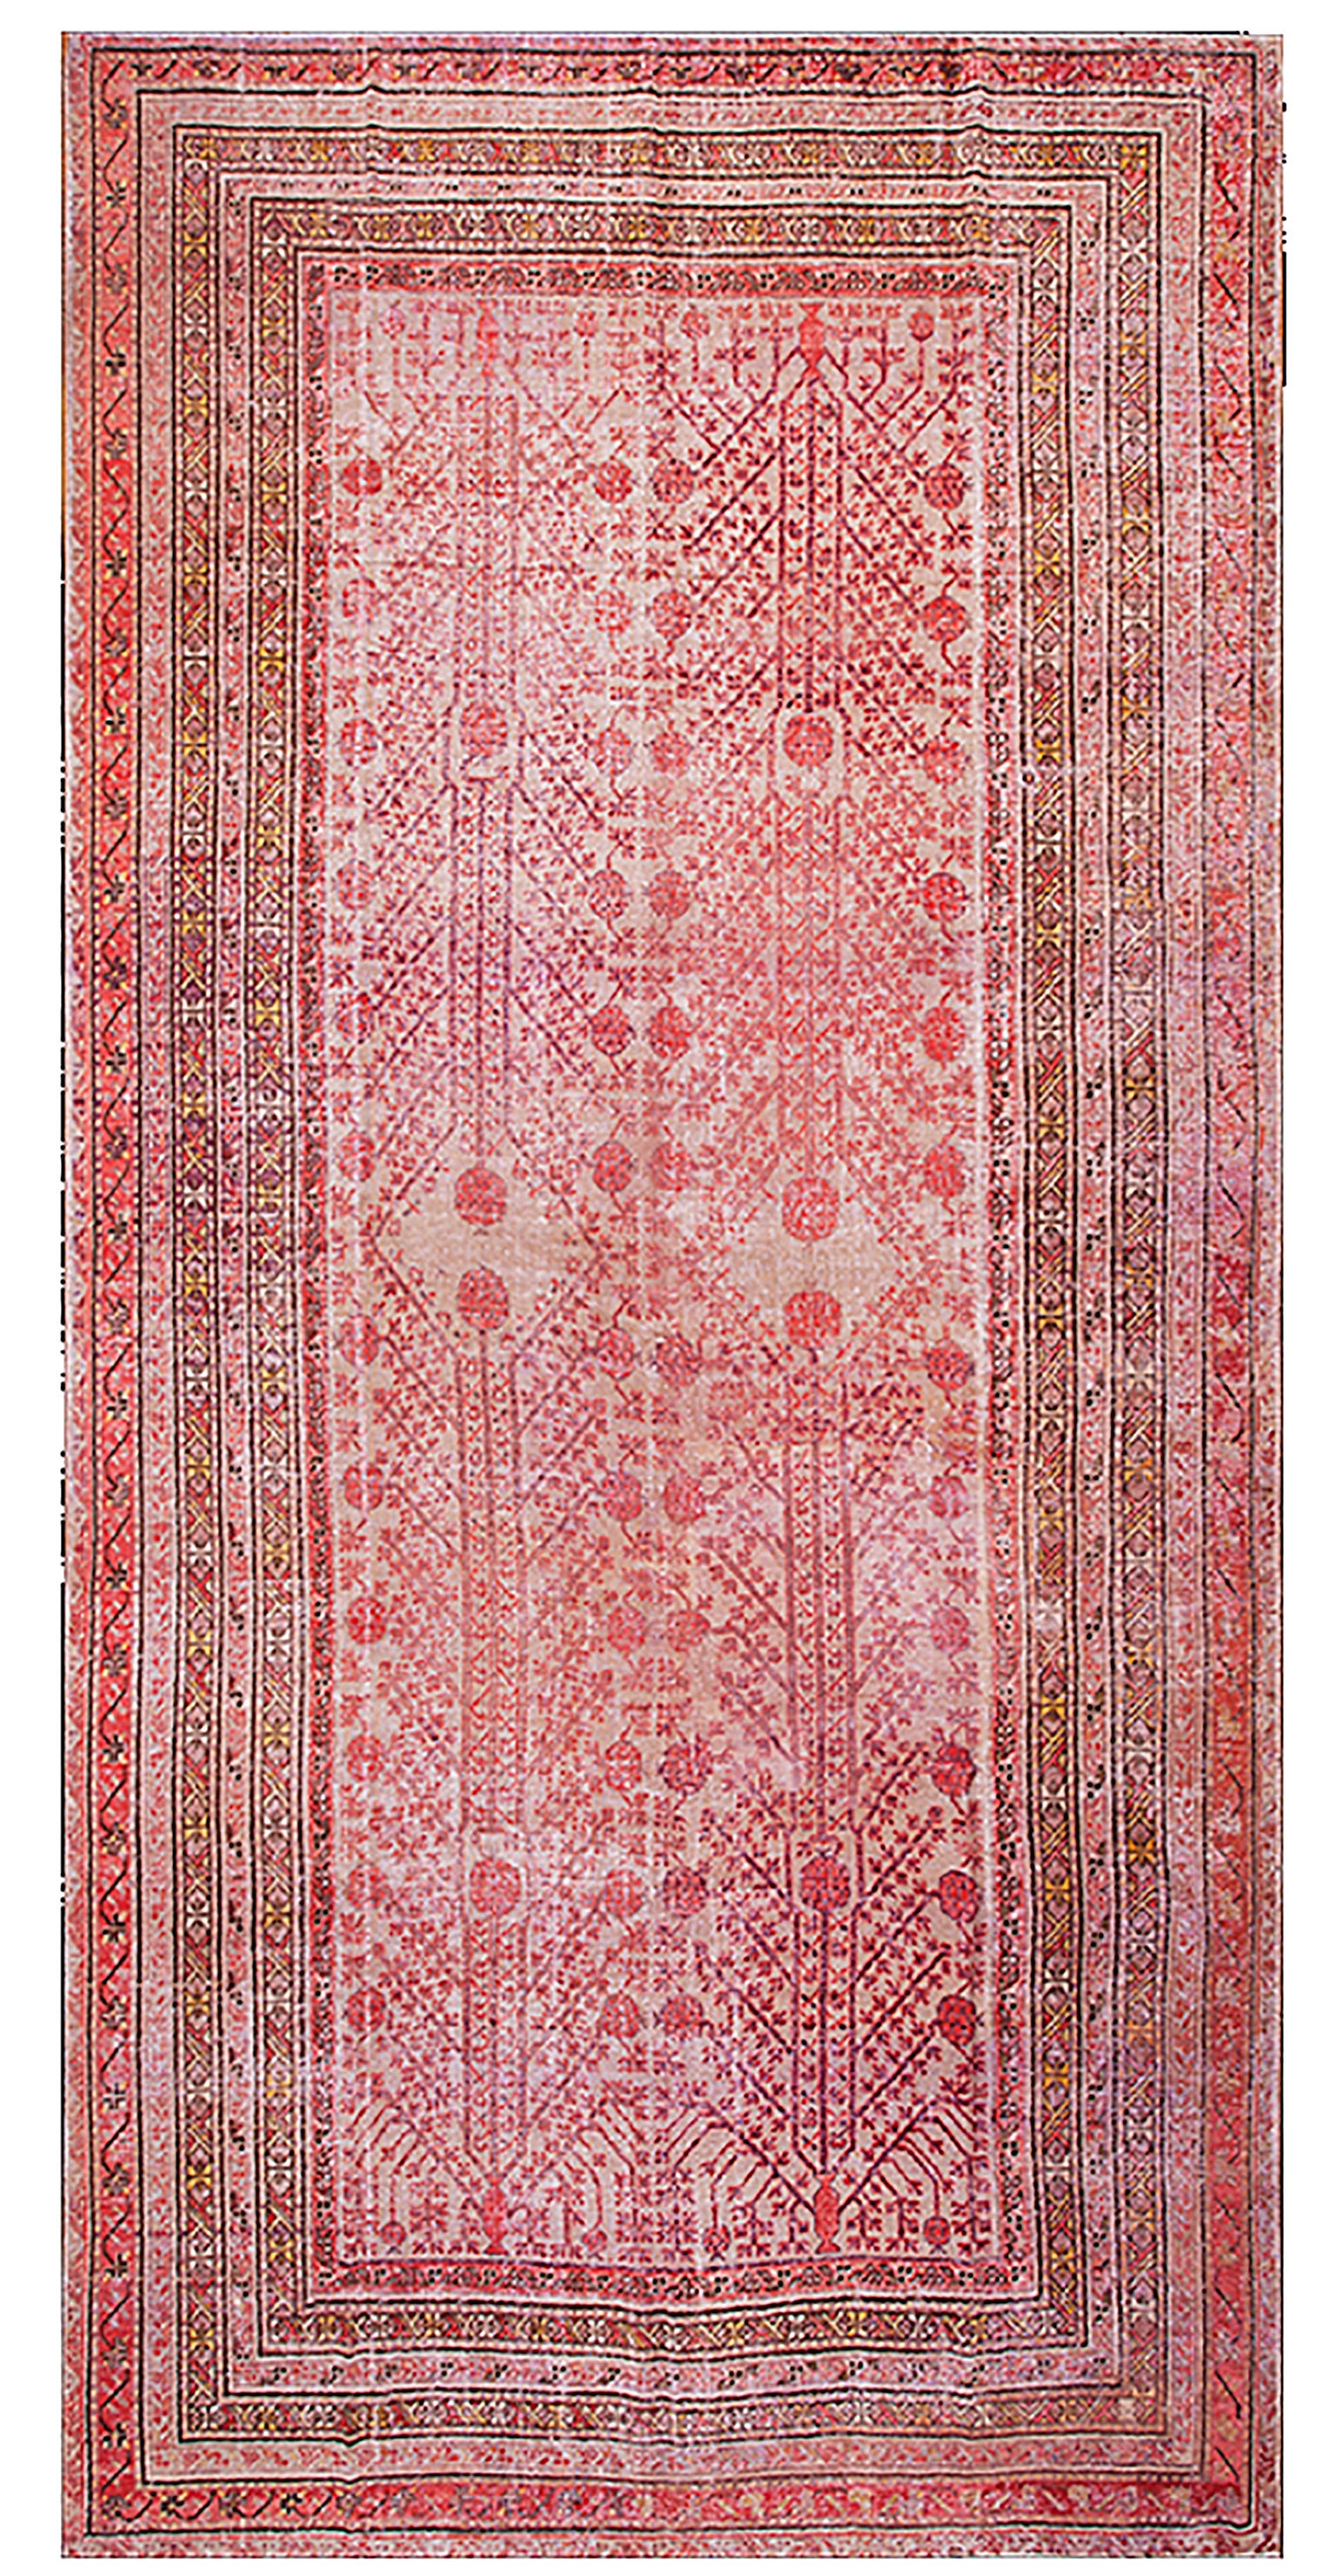 Early 20th Century Central Asian Khotan Carpet ( 8'8" x 18'4" - 265 x 558 ) For Sale